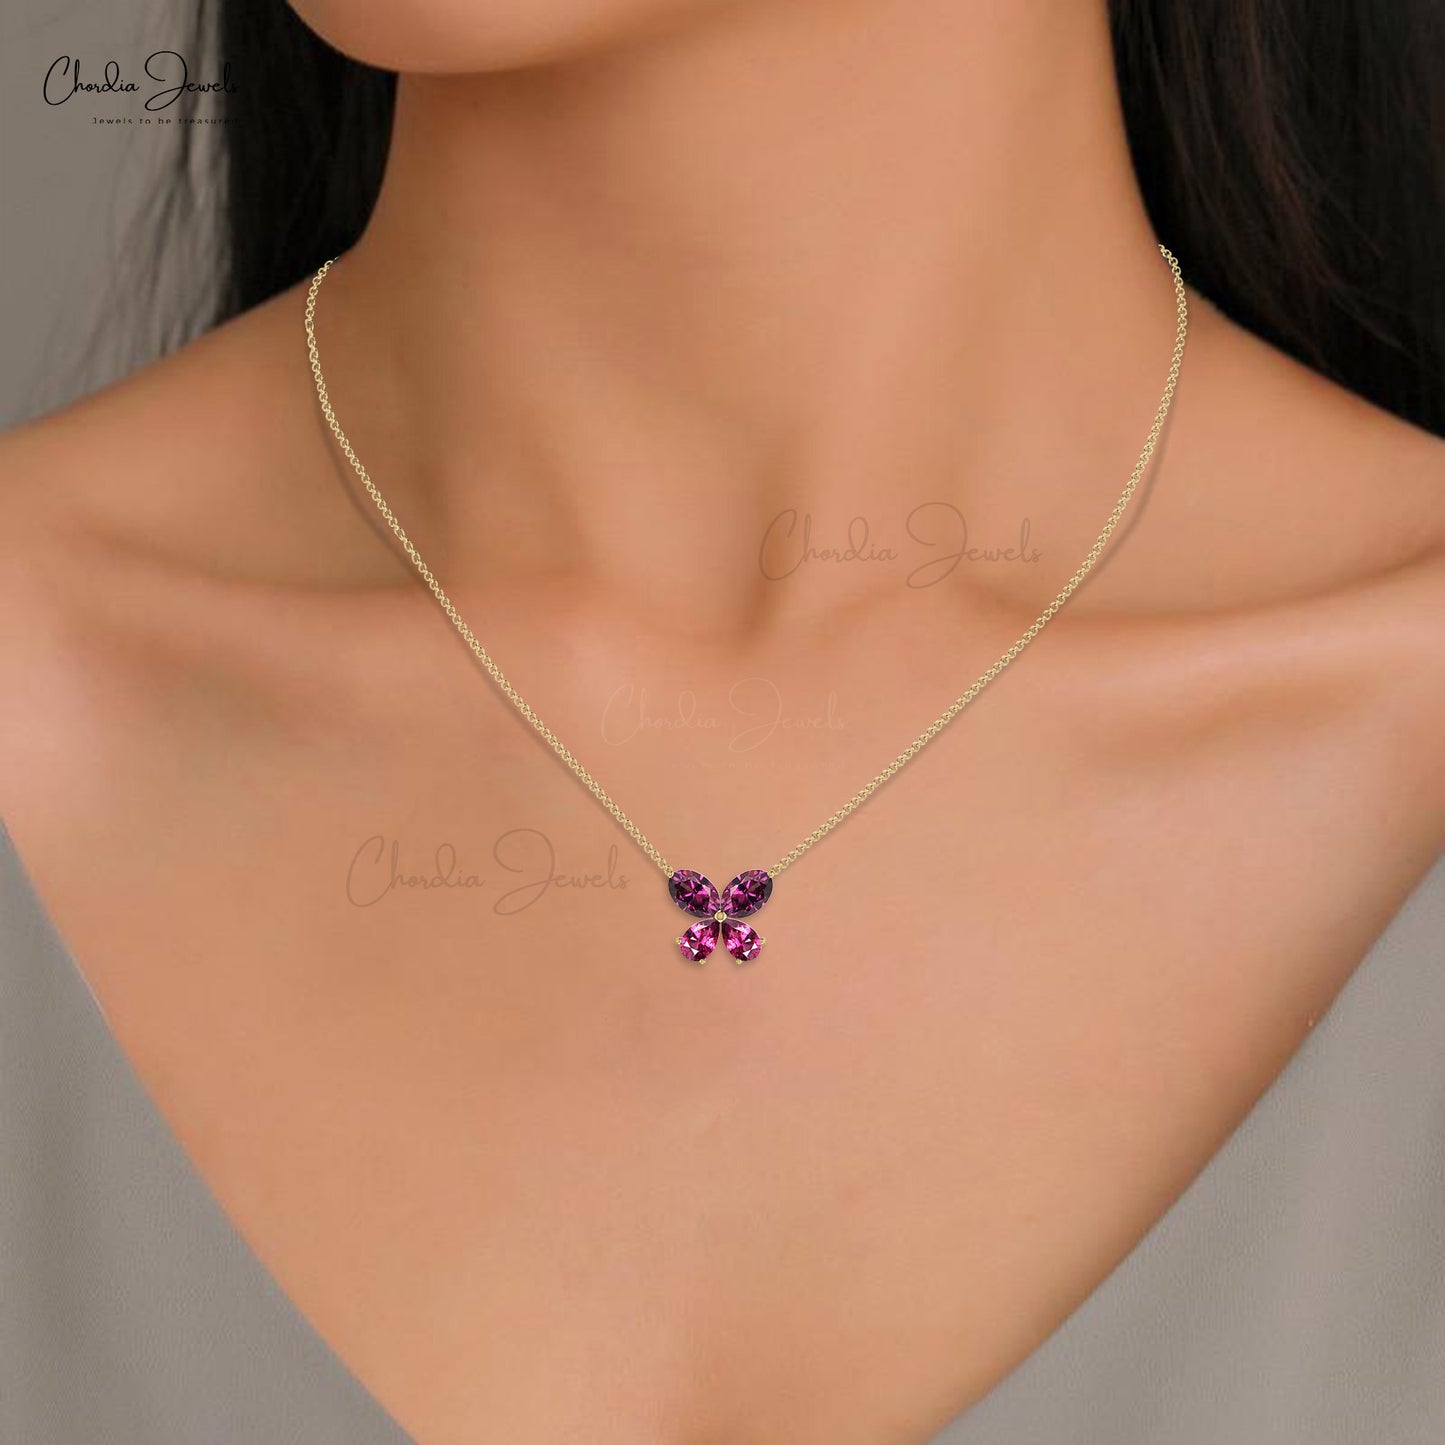 Load image into Gallery viewer, Latest New Antique 4-Stone Necklace Pendant Authentic Rhodolite Garnet Butterfly Necklace 14k Solid Gold Hallmarked Jewelry For Gift
